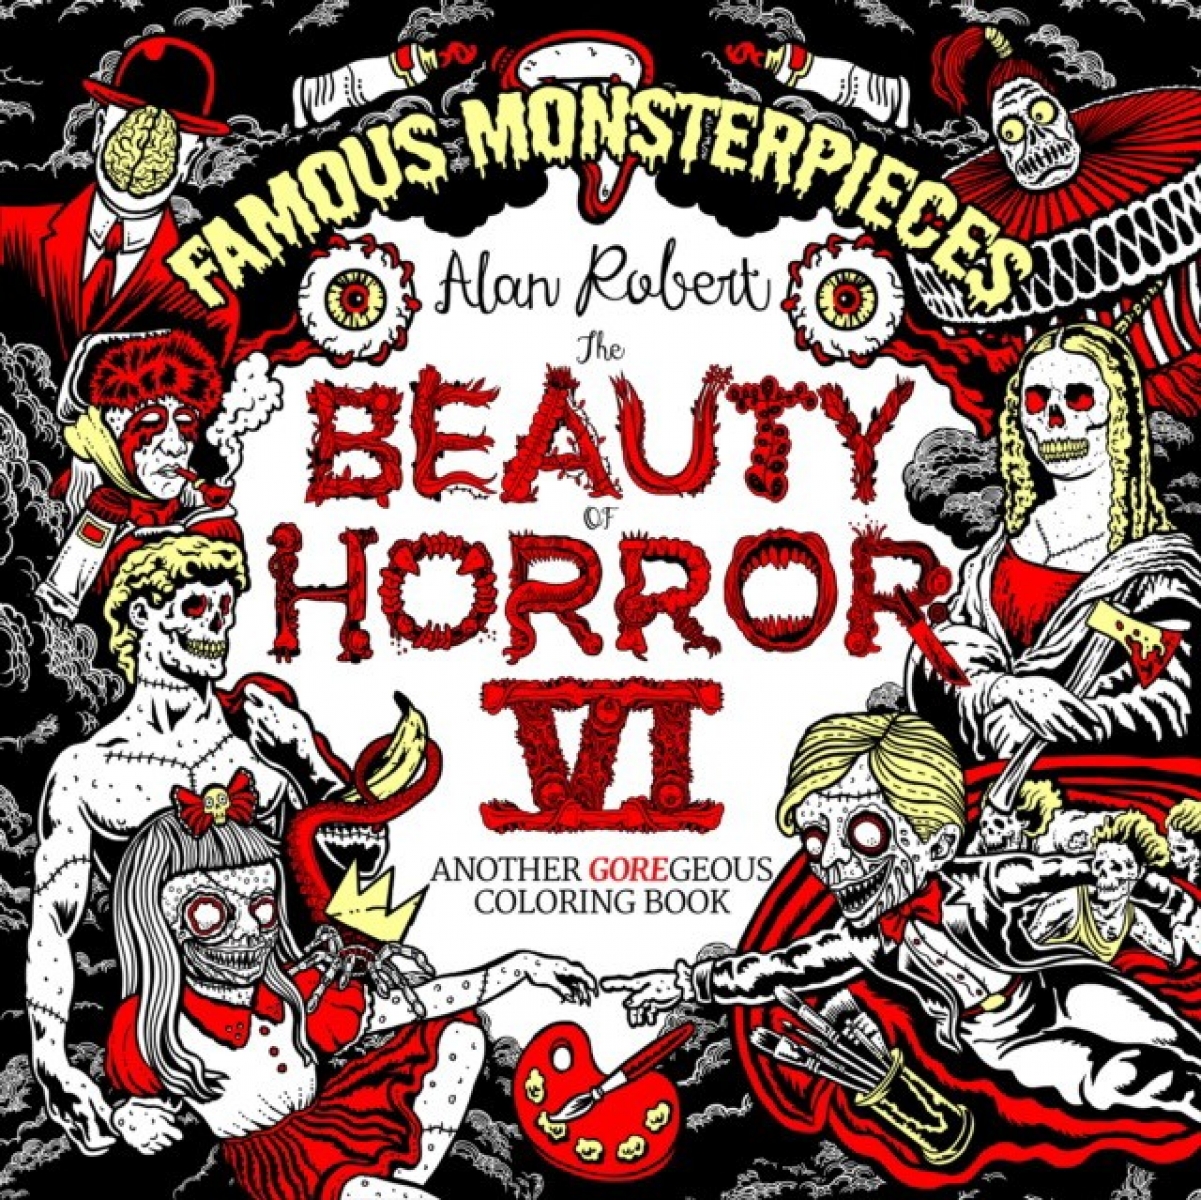 Robert Alan The Beauty of Horror 6: Famous Monsterpieces Coloring Book 